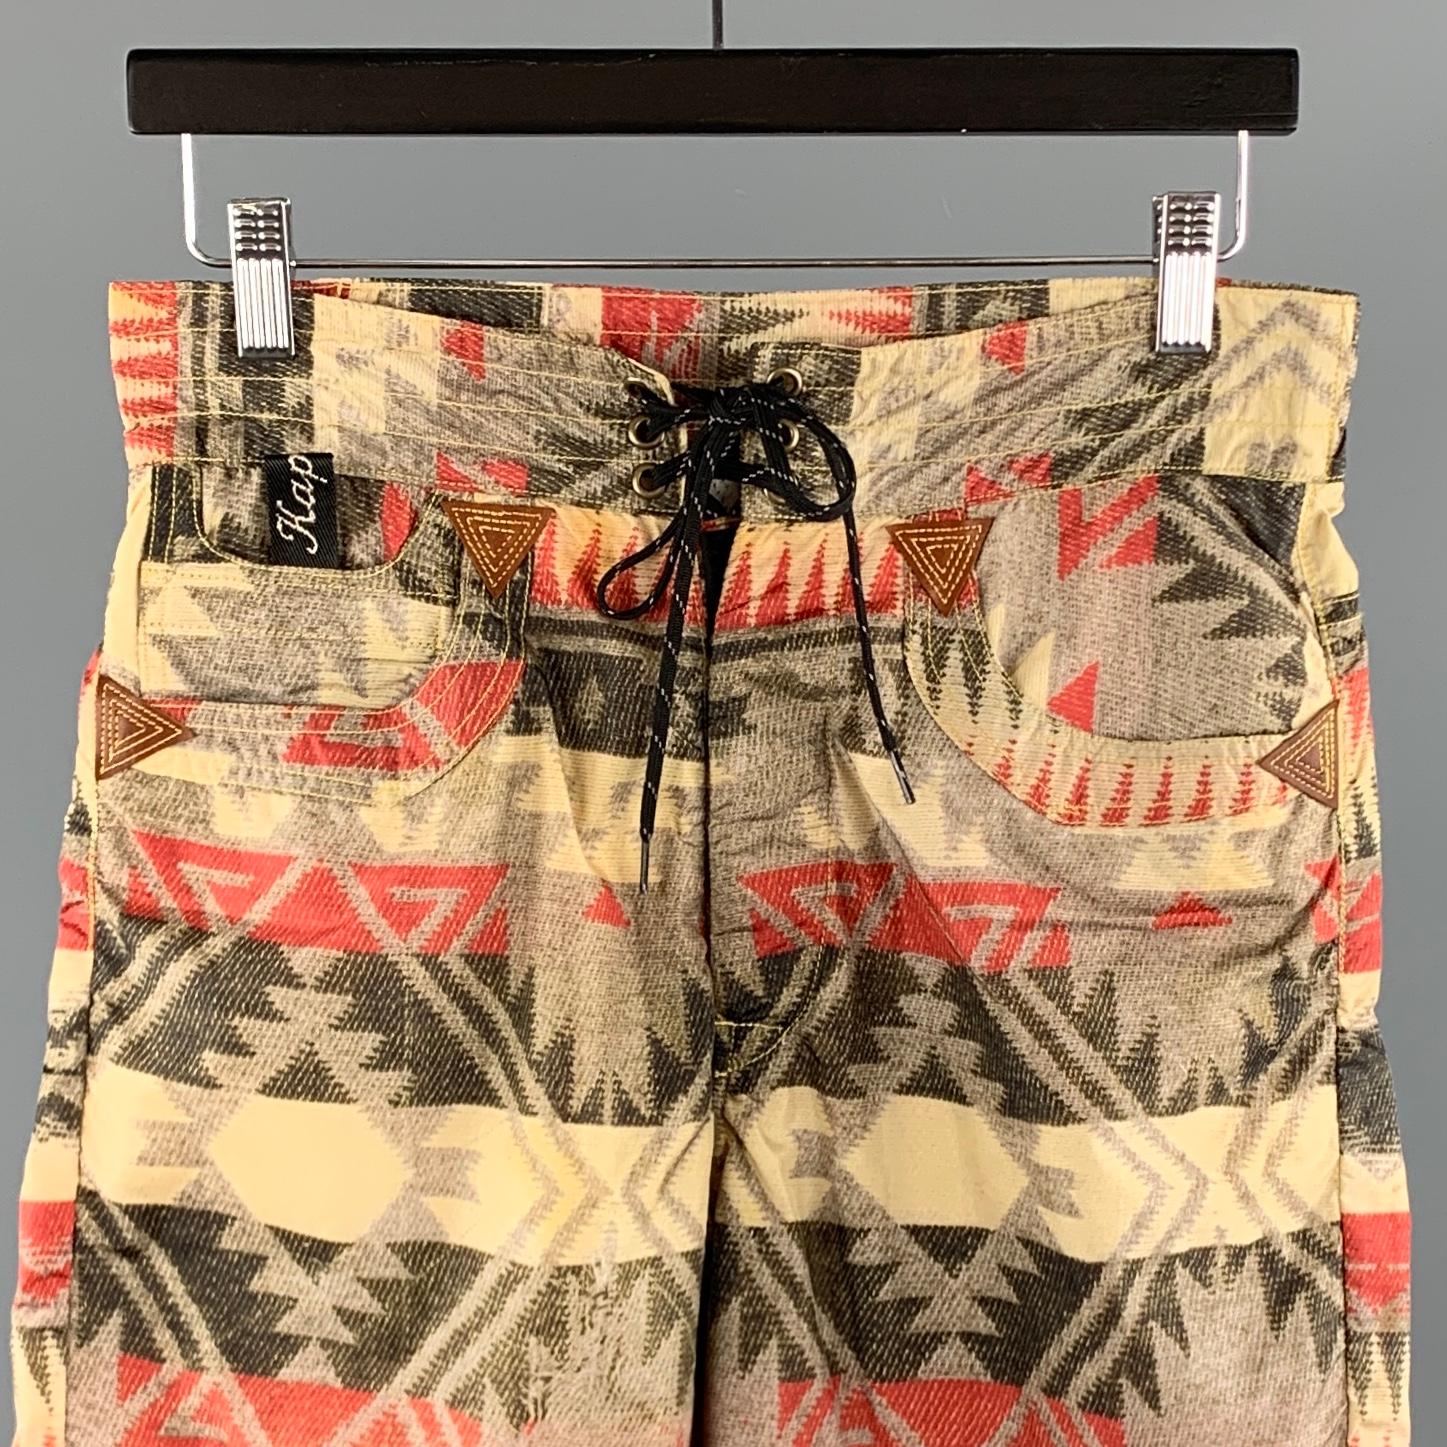 KAPITAL Swim Trunks comes in a khaki print nylon featuring a drawstring closure, lined, contrast stitching, and a back strap detail. Made in Japan. 

New With Tags.
Marked: 2

Measurements:

Waist: 30 in. 
Rise: 11 in.
Inseam: 7.5 in. 